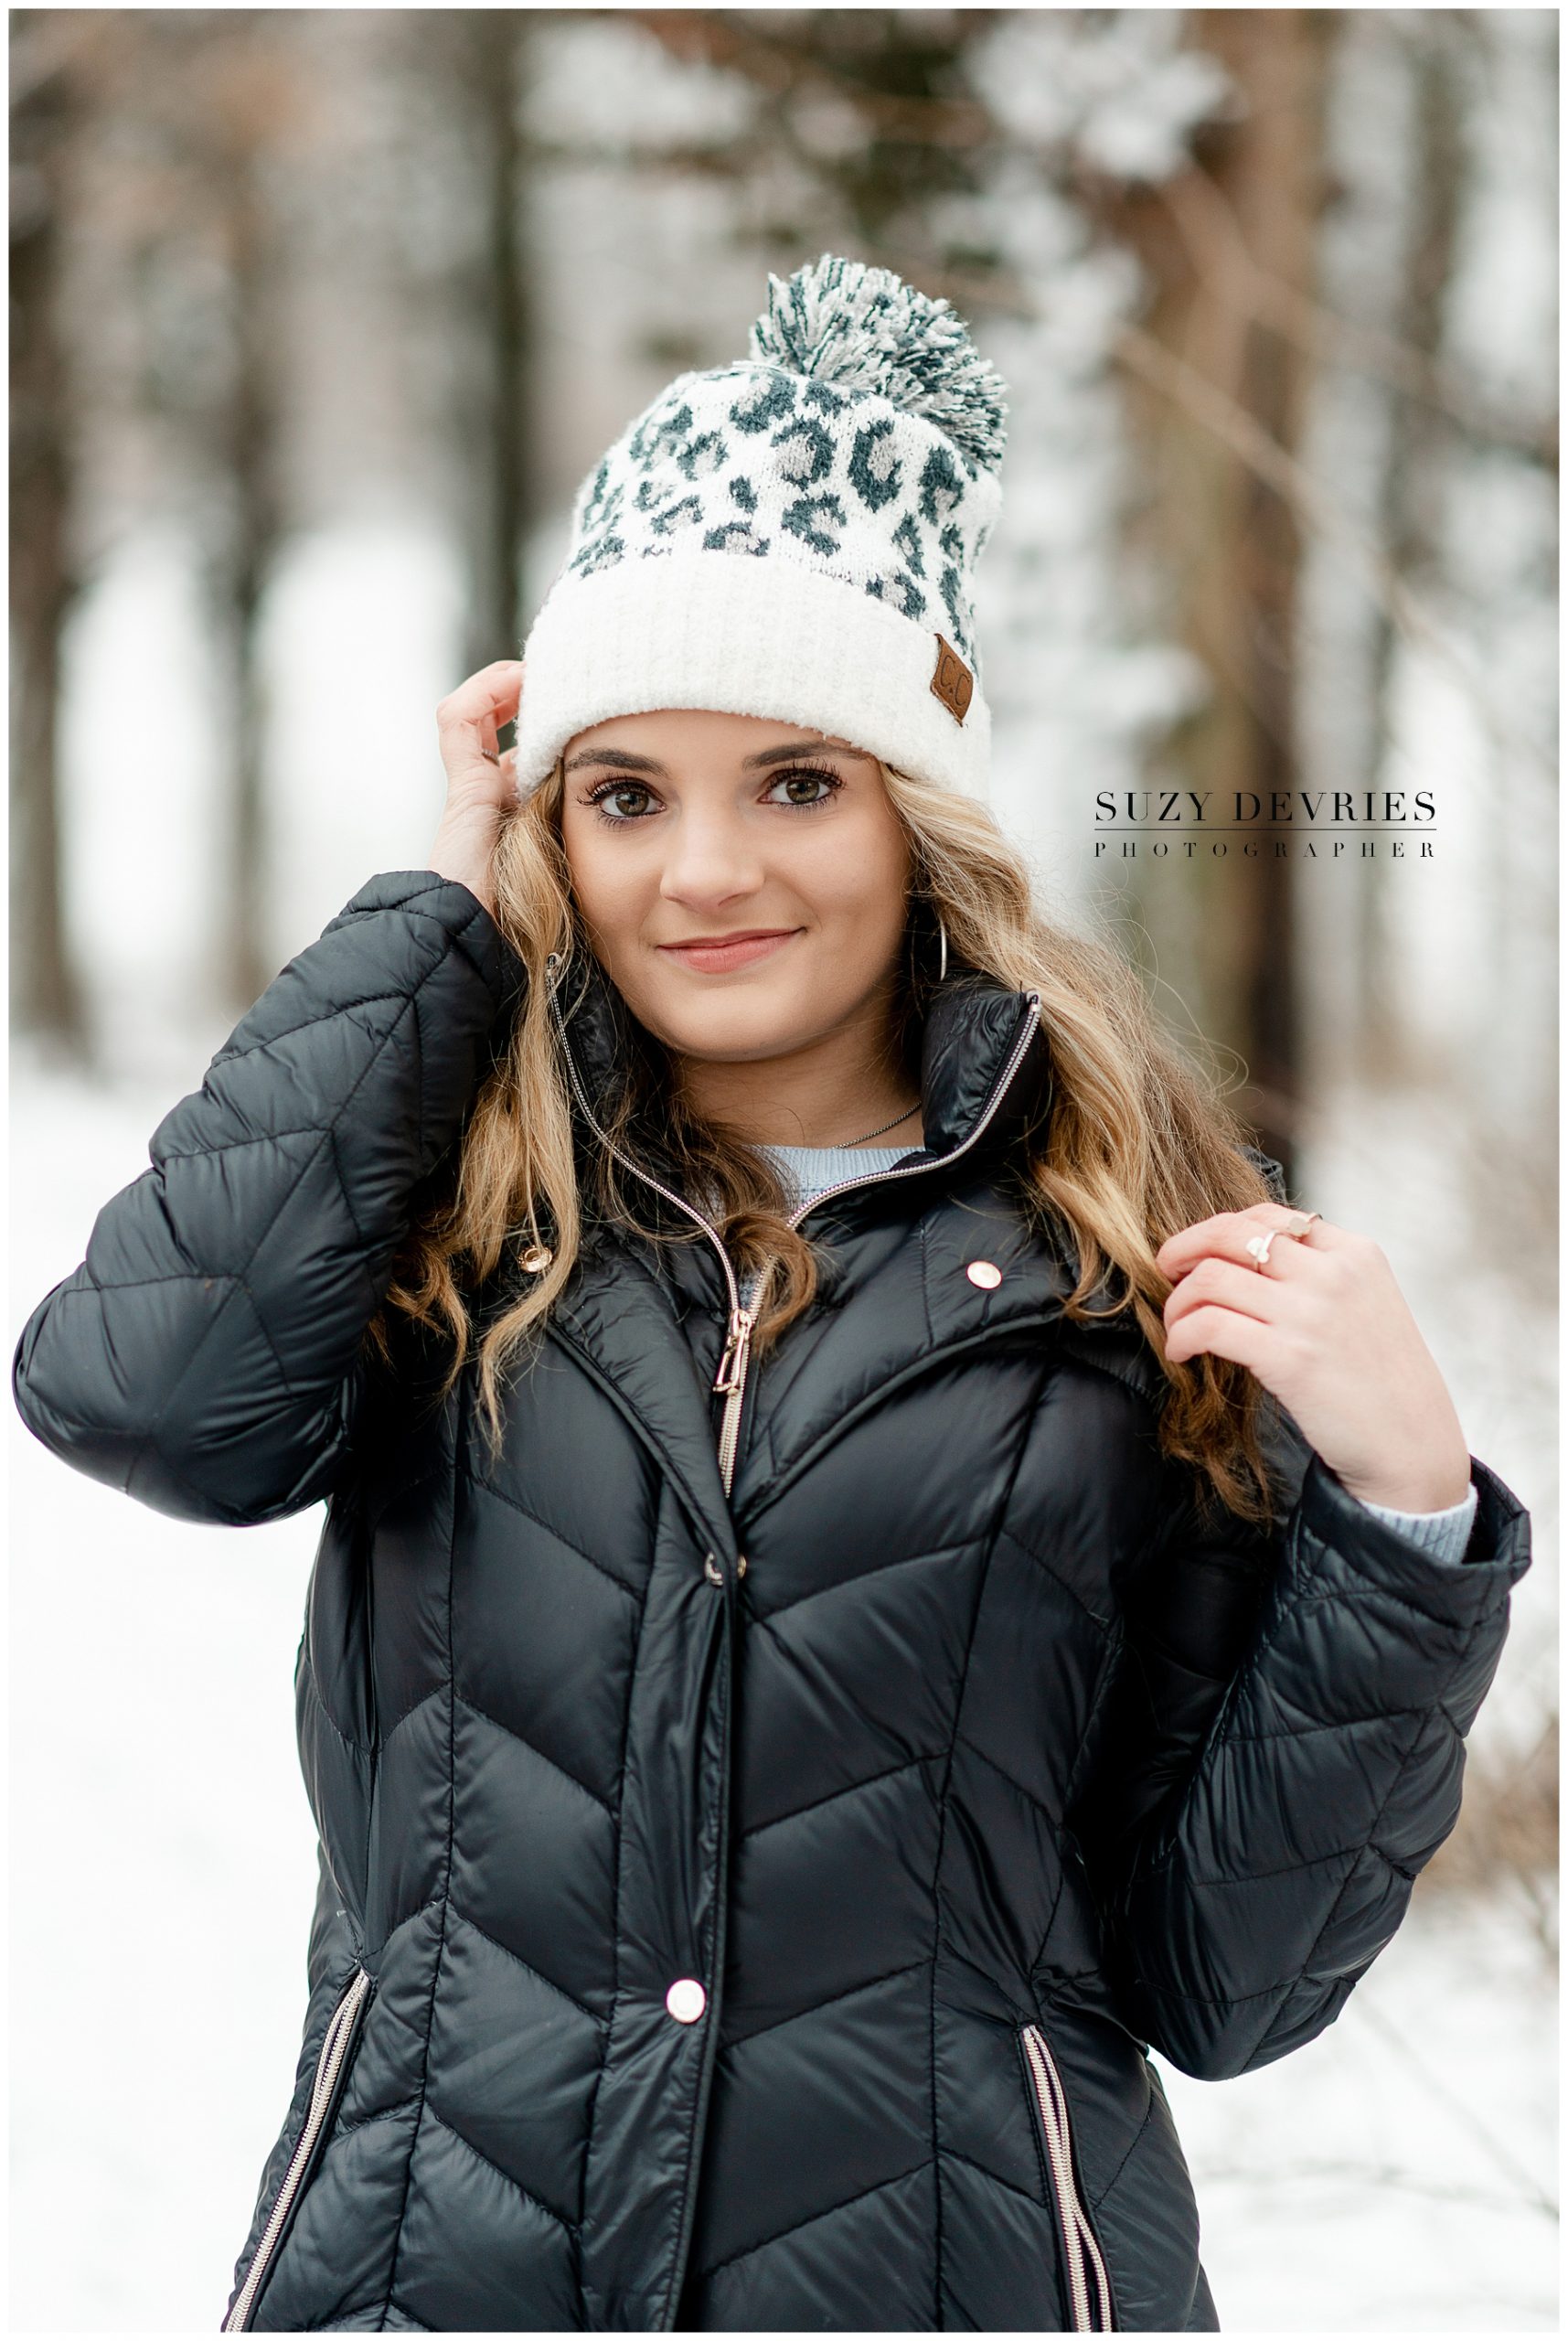 Edwardsville High School Senior girl in the snow wearing a black coat and leopard hat.